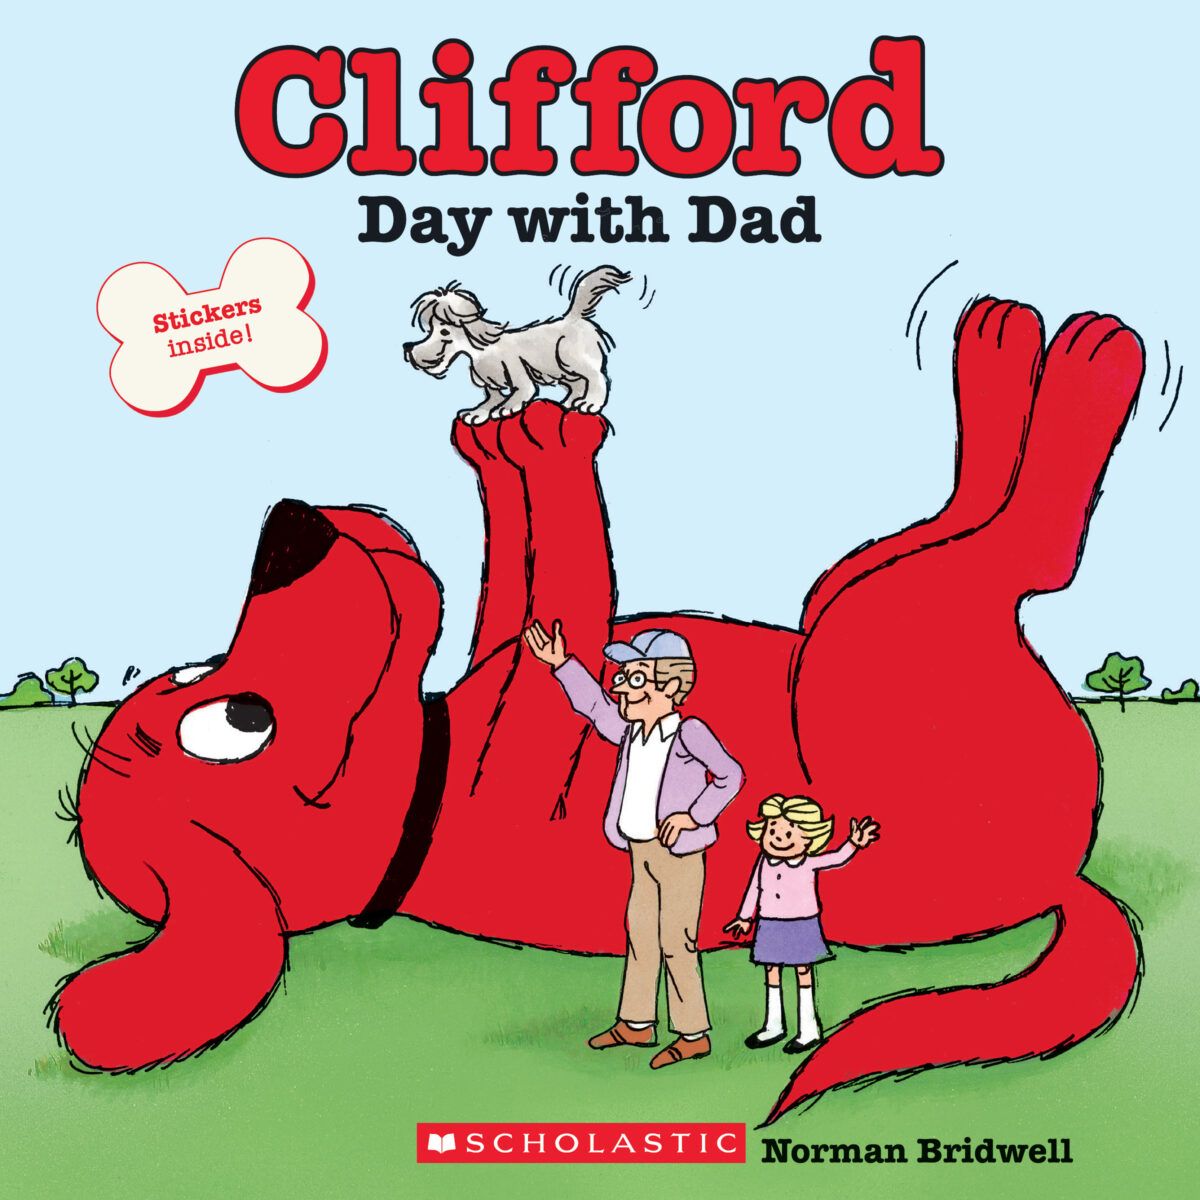 Norman Bridwell. Scholastic Inc. Clifford's Day with dad. "Dakota Clifford"+Oh.